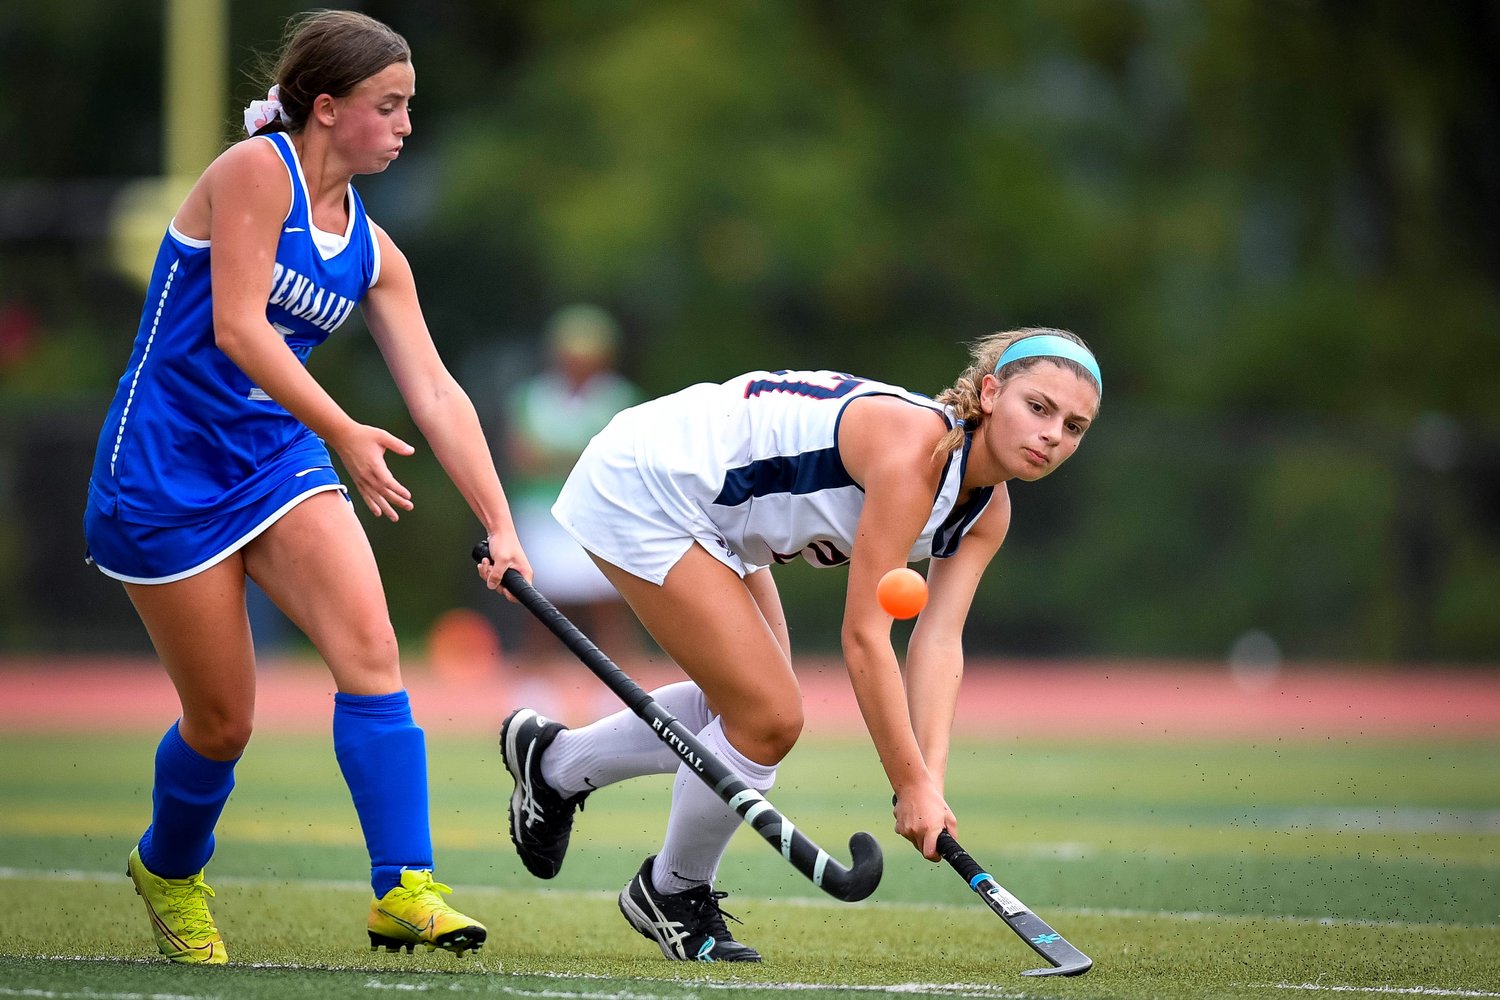 CB East’s Sienna Valenti watches her pass in front of Bensalem’s Giuliana Pasquarella.